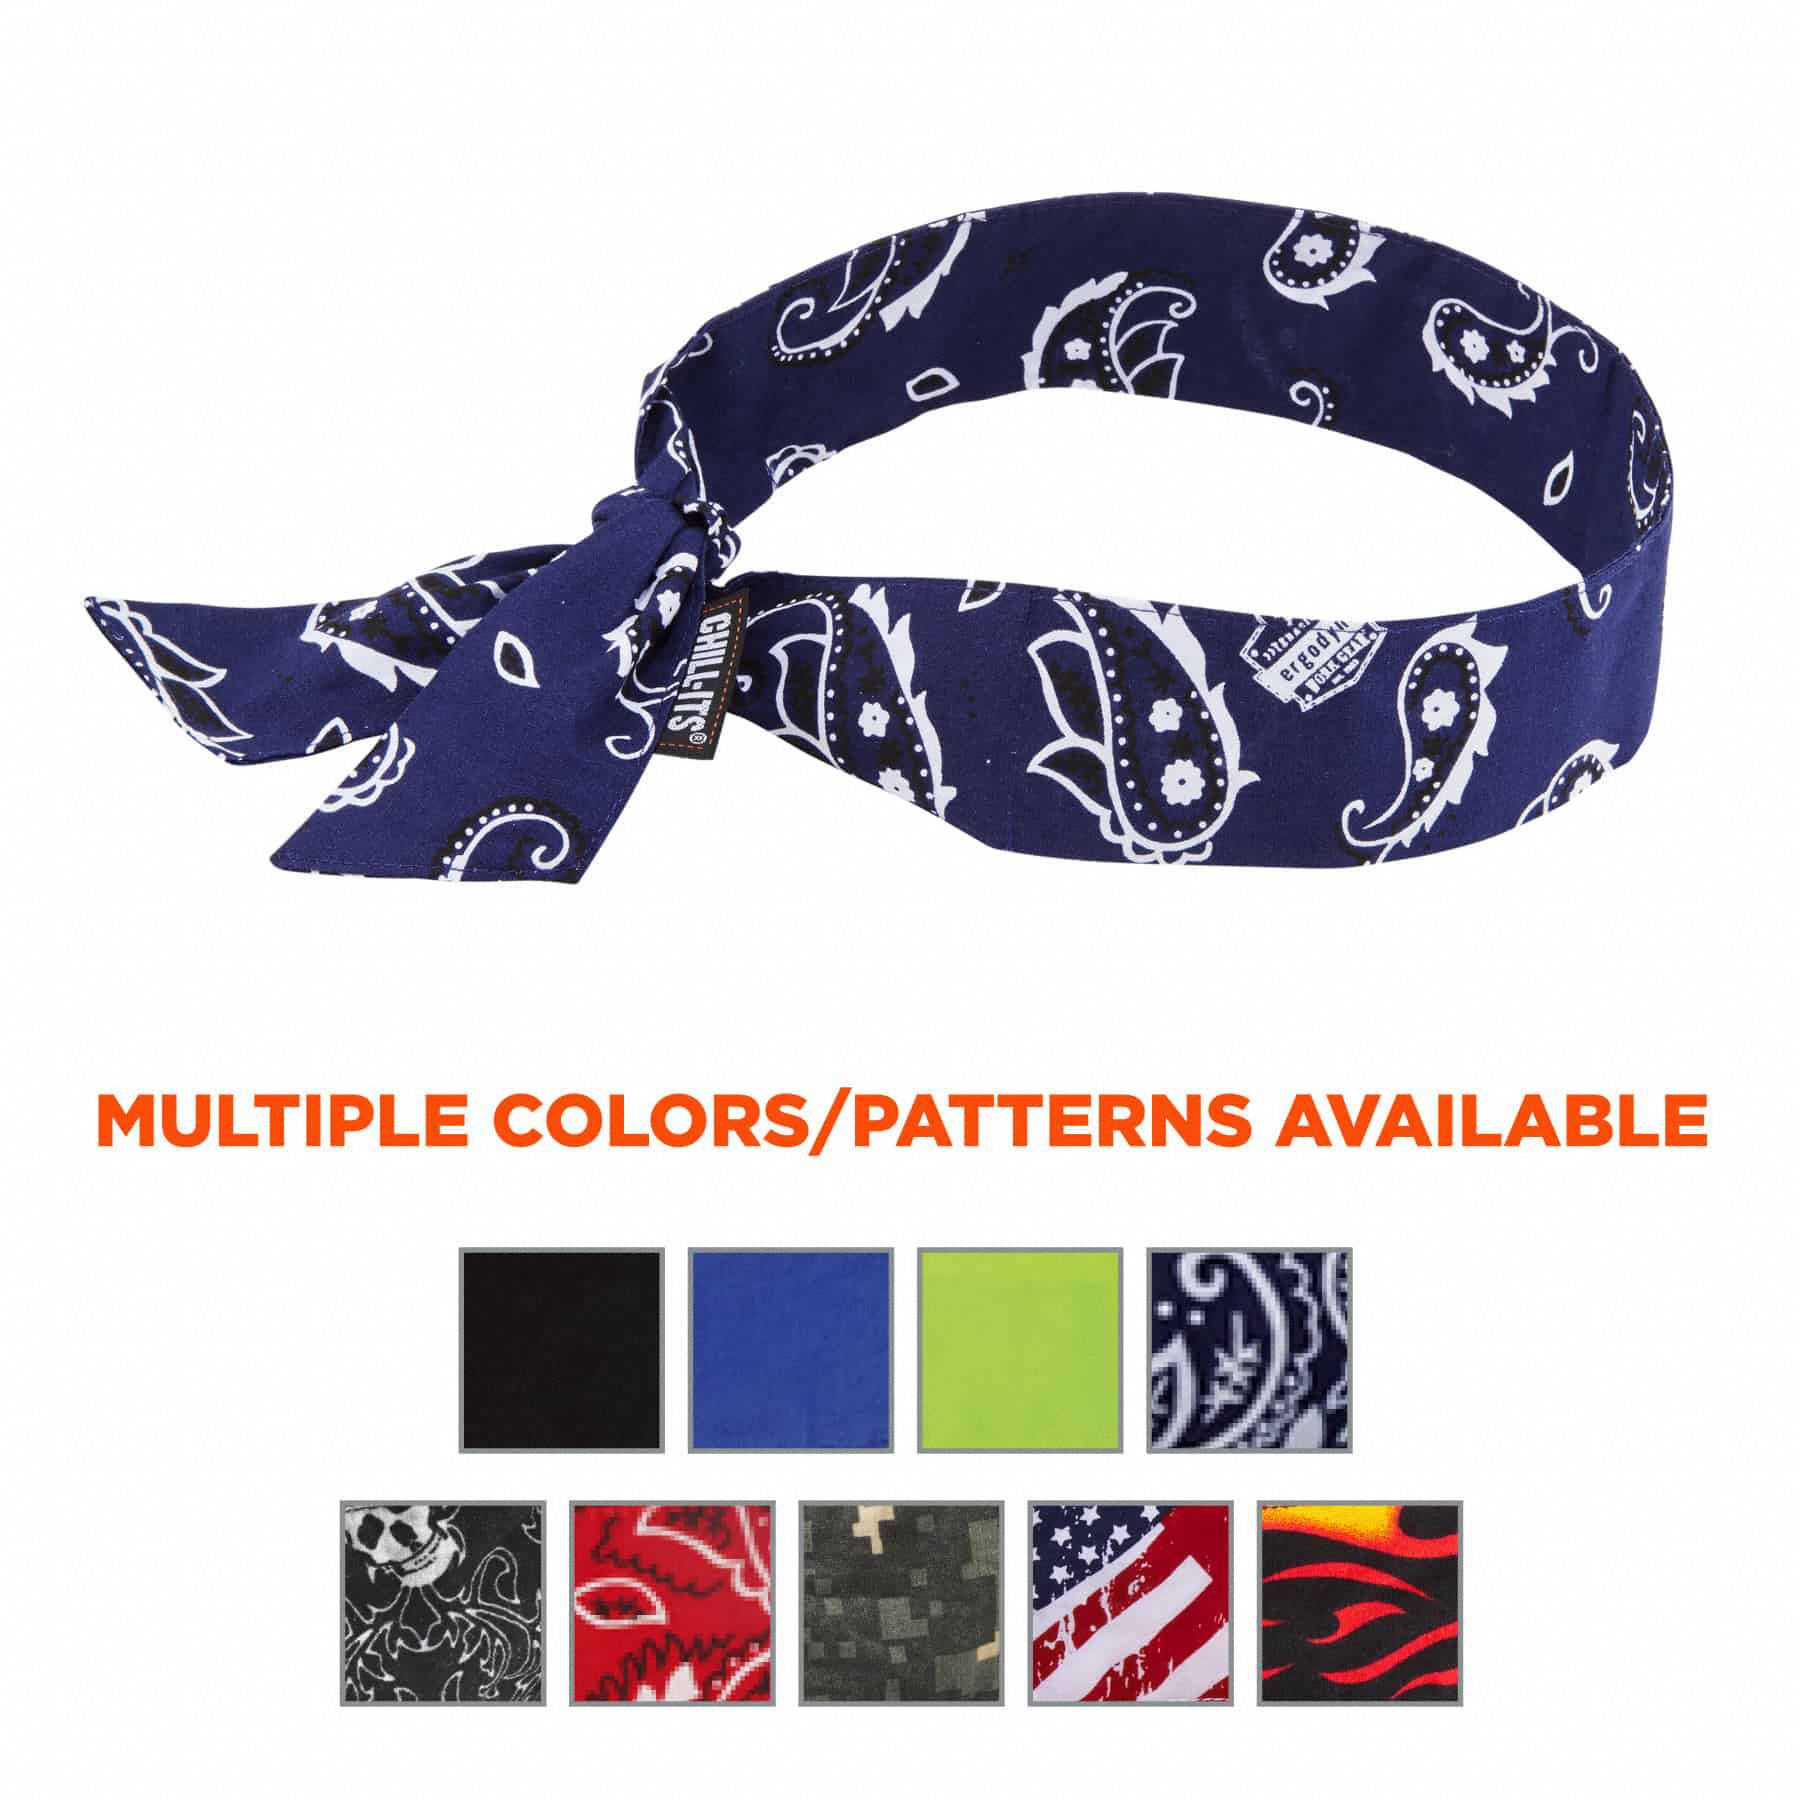 Ergodyne Chill Its 6700 Cooling Bandana 6-Pack Evaporative Polymer Crystals For Cooling Relief Tie For Adjustable Fit 